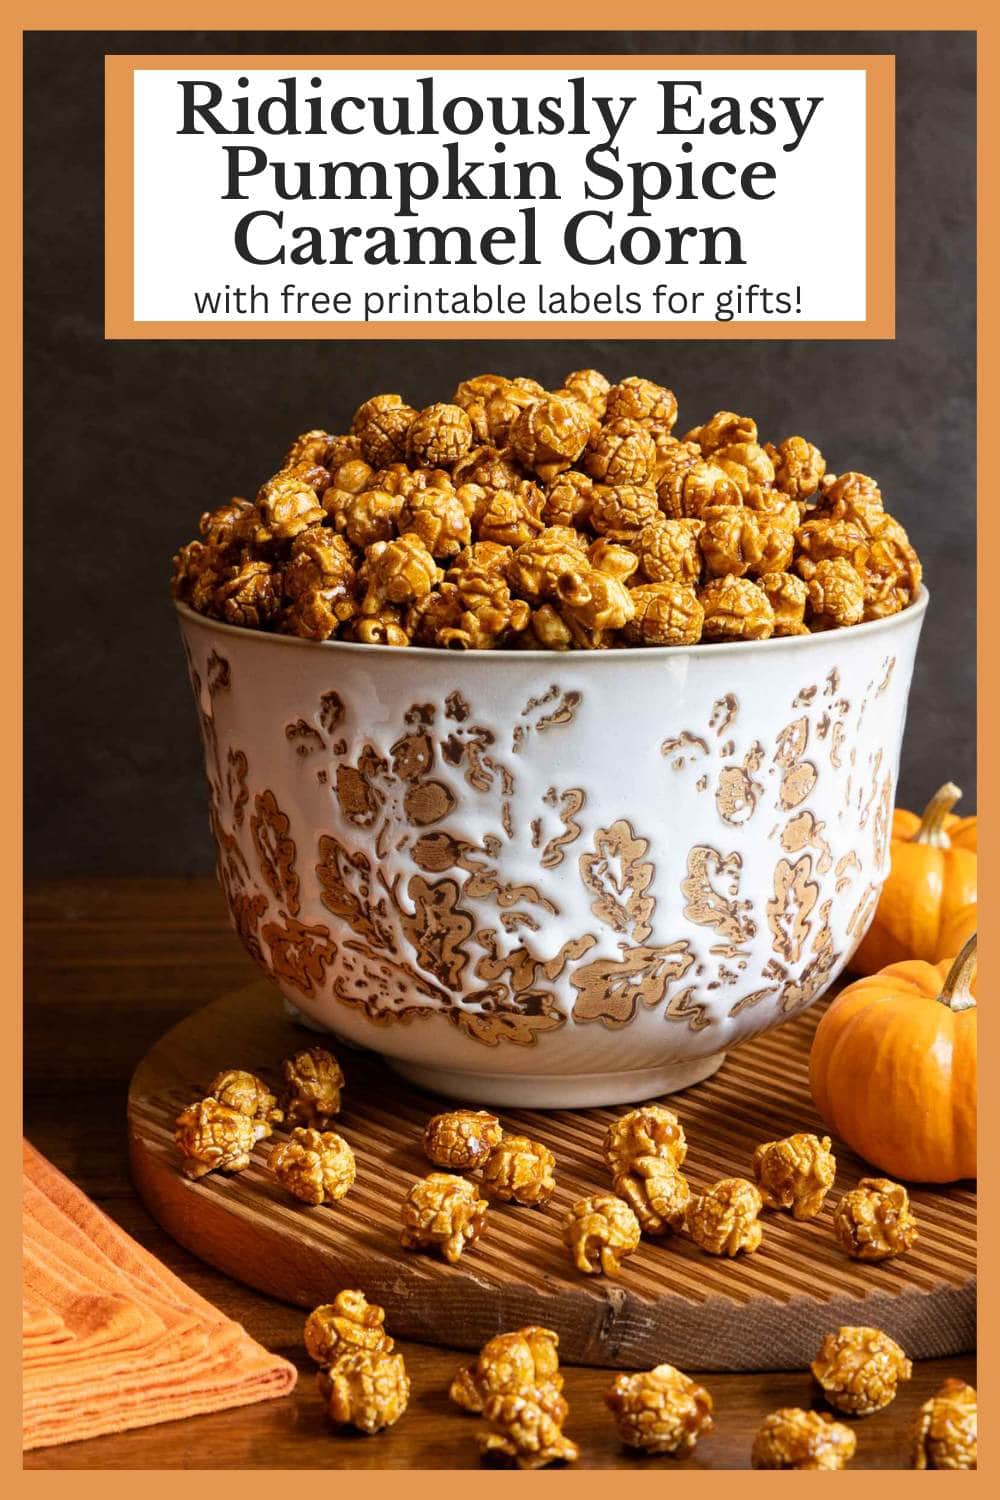 Ridiculously Easy Pumpkin Pie Spice Caramel Corn (with free printable labels for gifts)